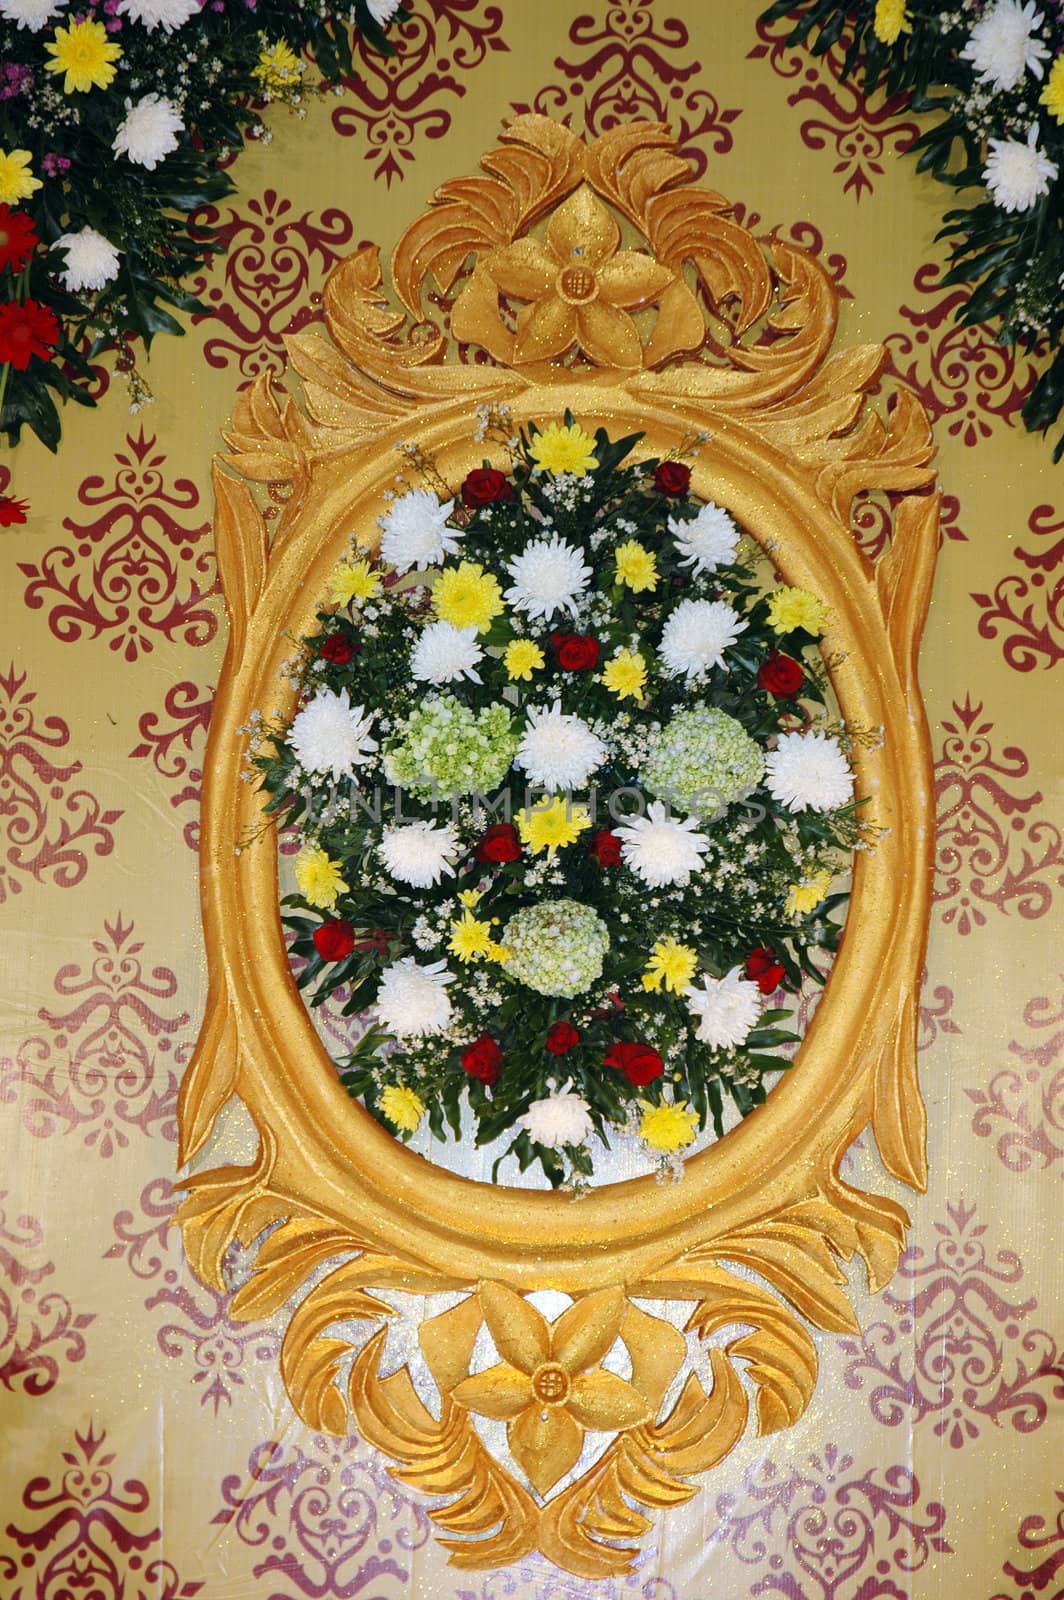 flowers  decoration on the wall at  wedding party